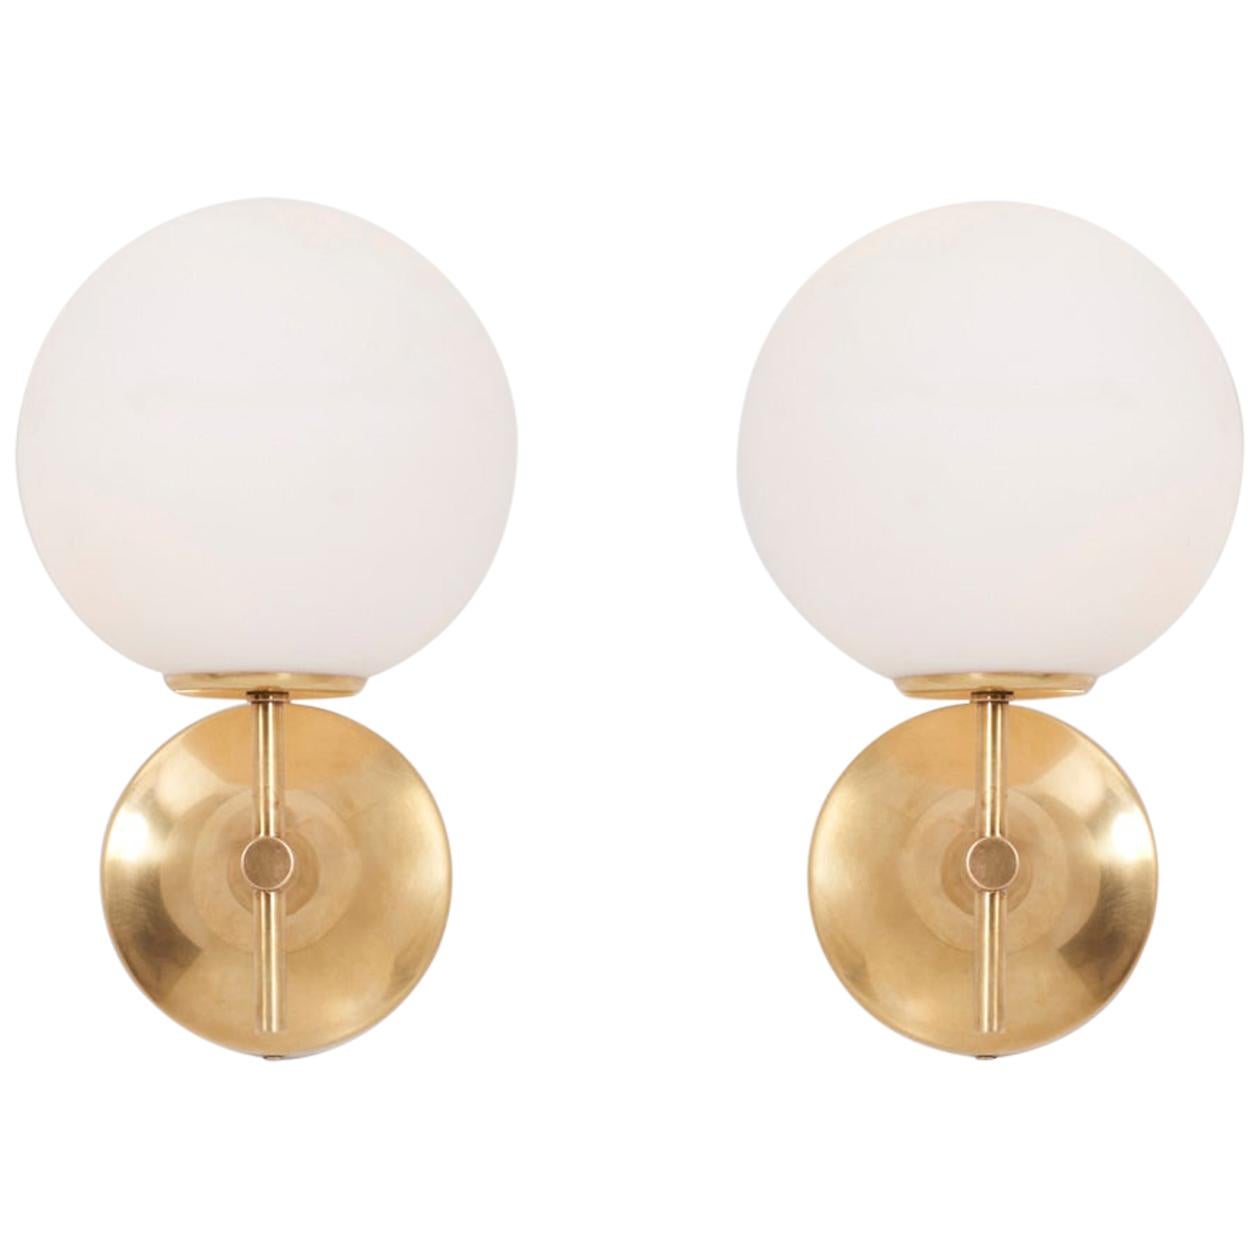 Pair of Wall Lights or Sconces by Max Bill for Temde Leuchten, Swiss, 1960s